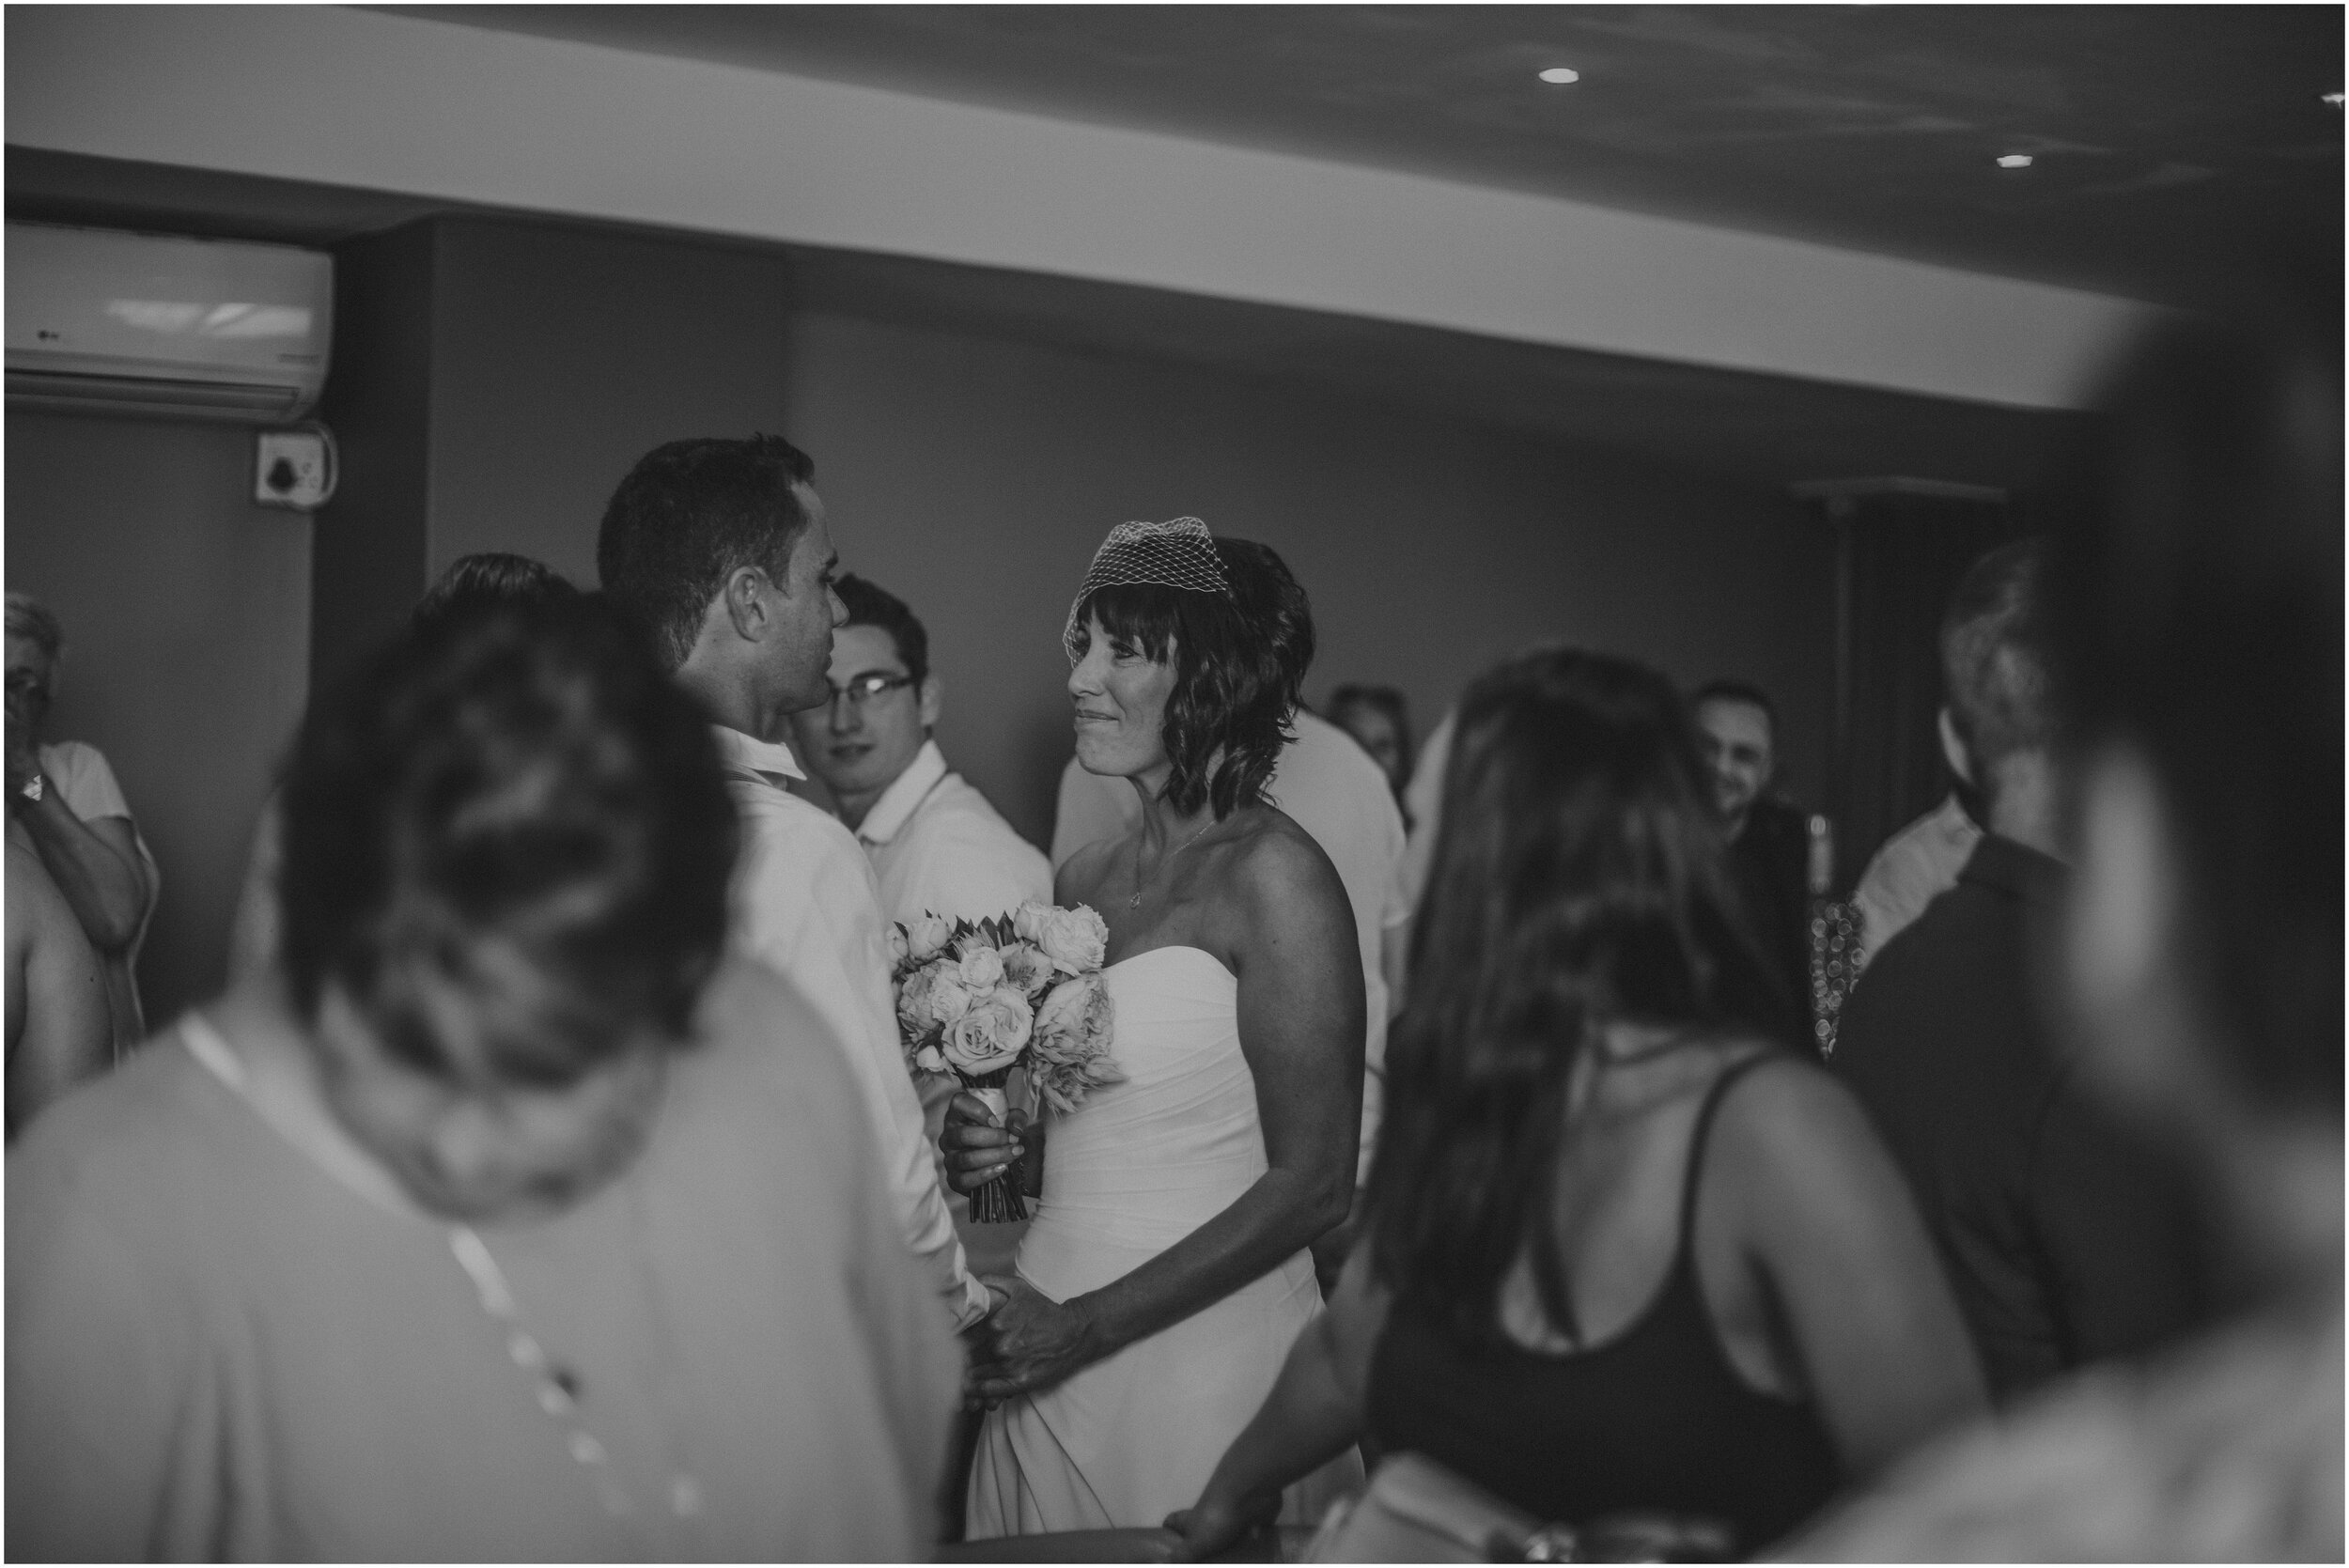 Top Wedding Photographer Cape Town South Africa Artistic Creative Documentary Wedding Photography Rue Kruger_2044.jpg